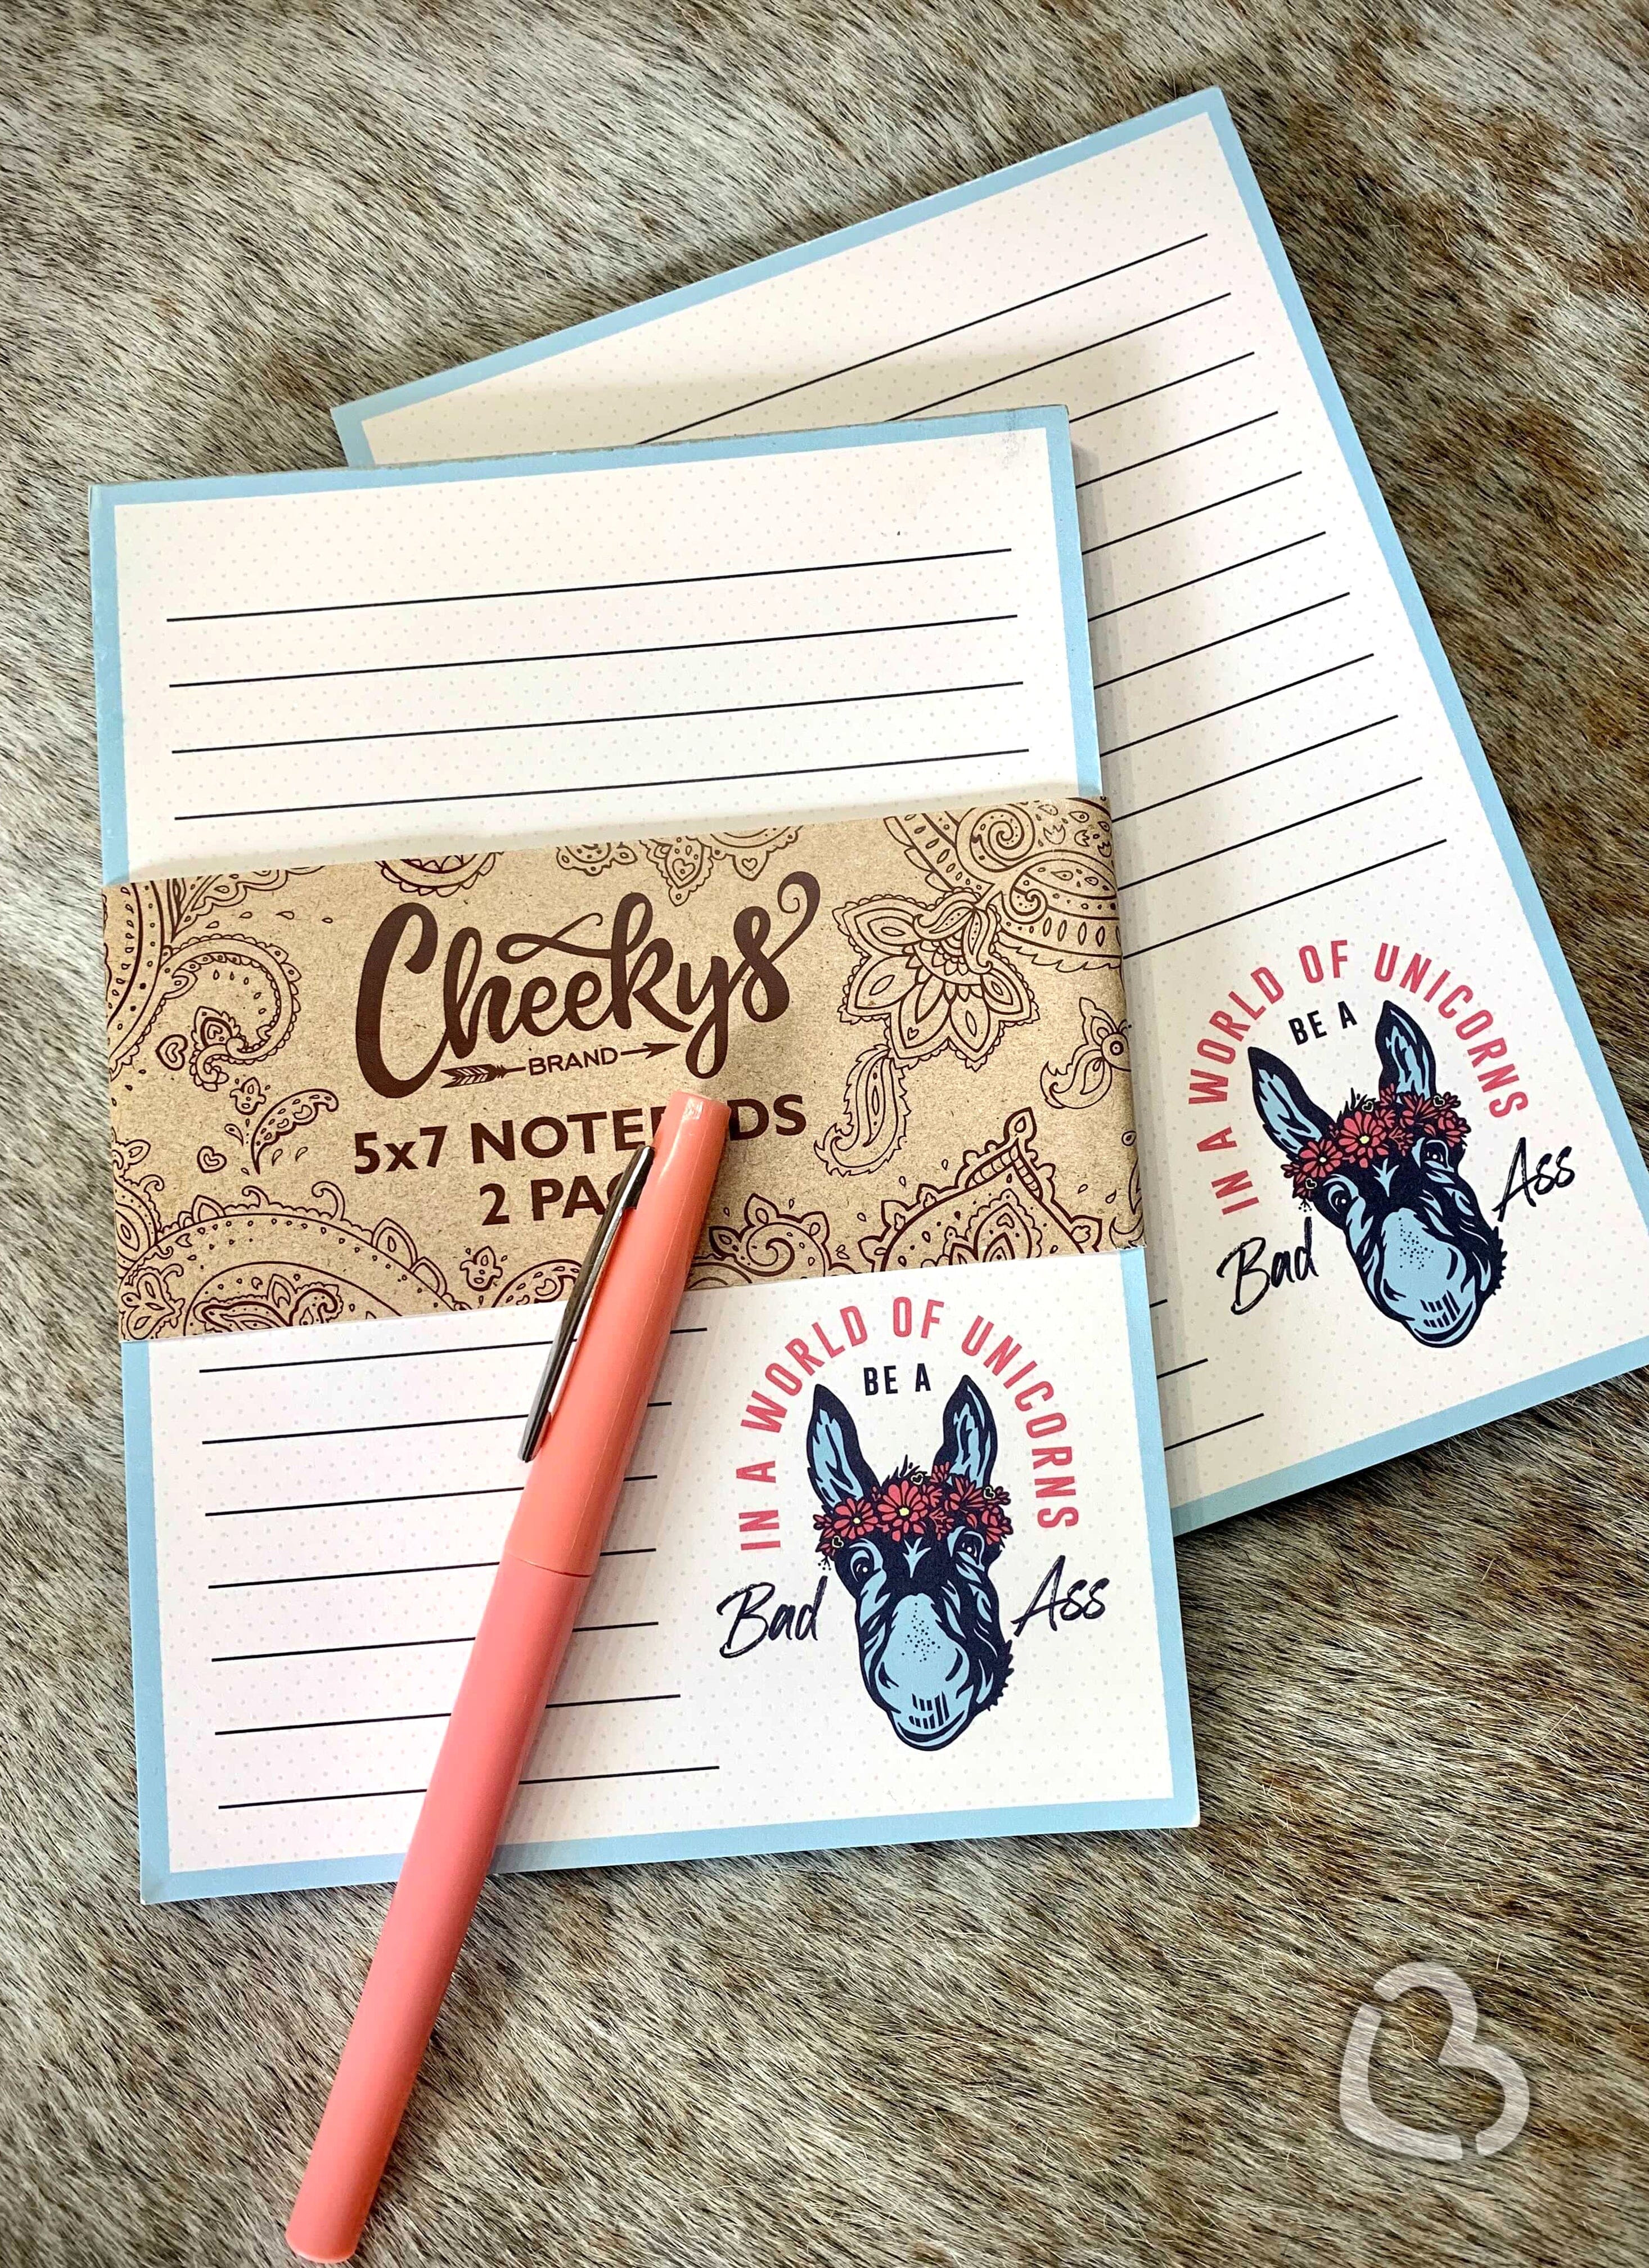 Be a Bad Ass Note Pad Set of 2 Cheekys Brand 